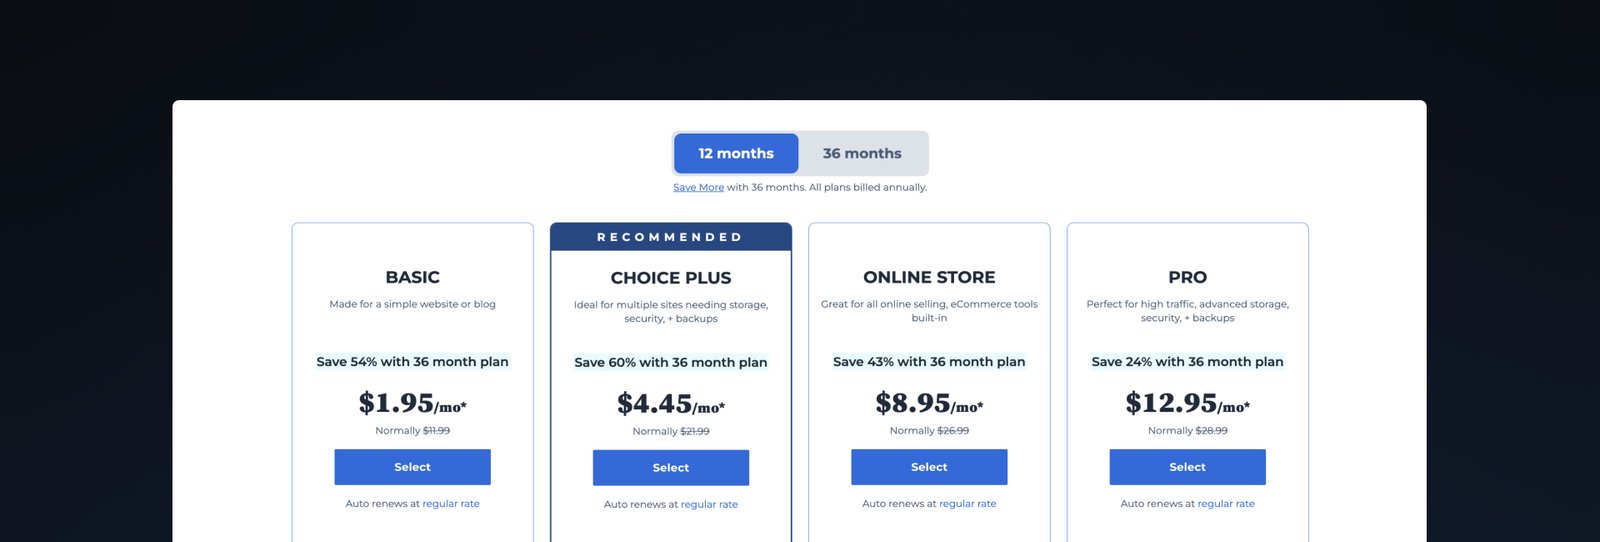 Bluehost hosting pricing plans